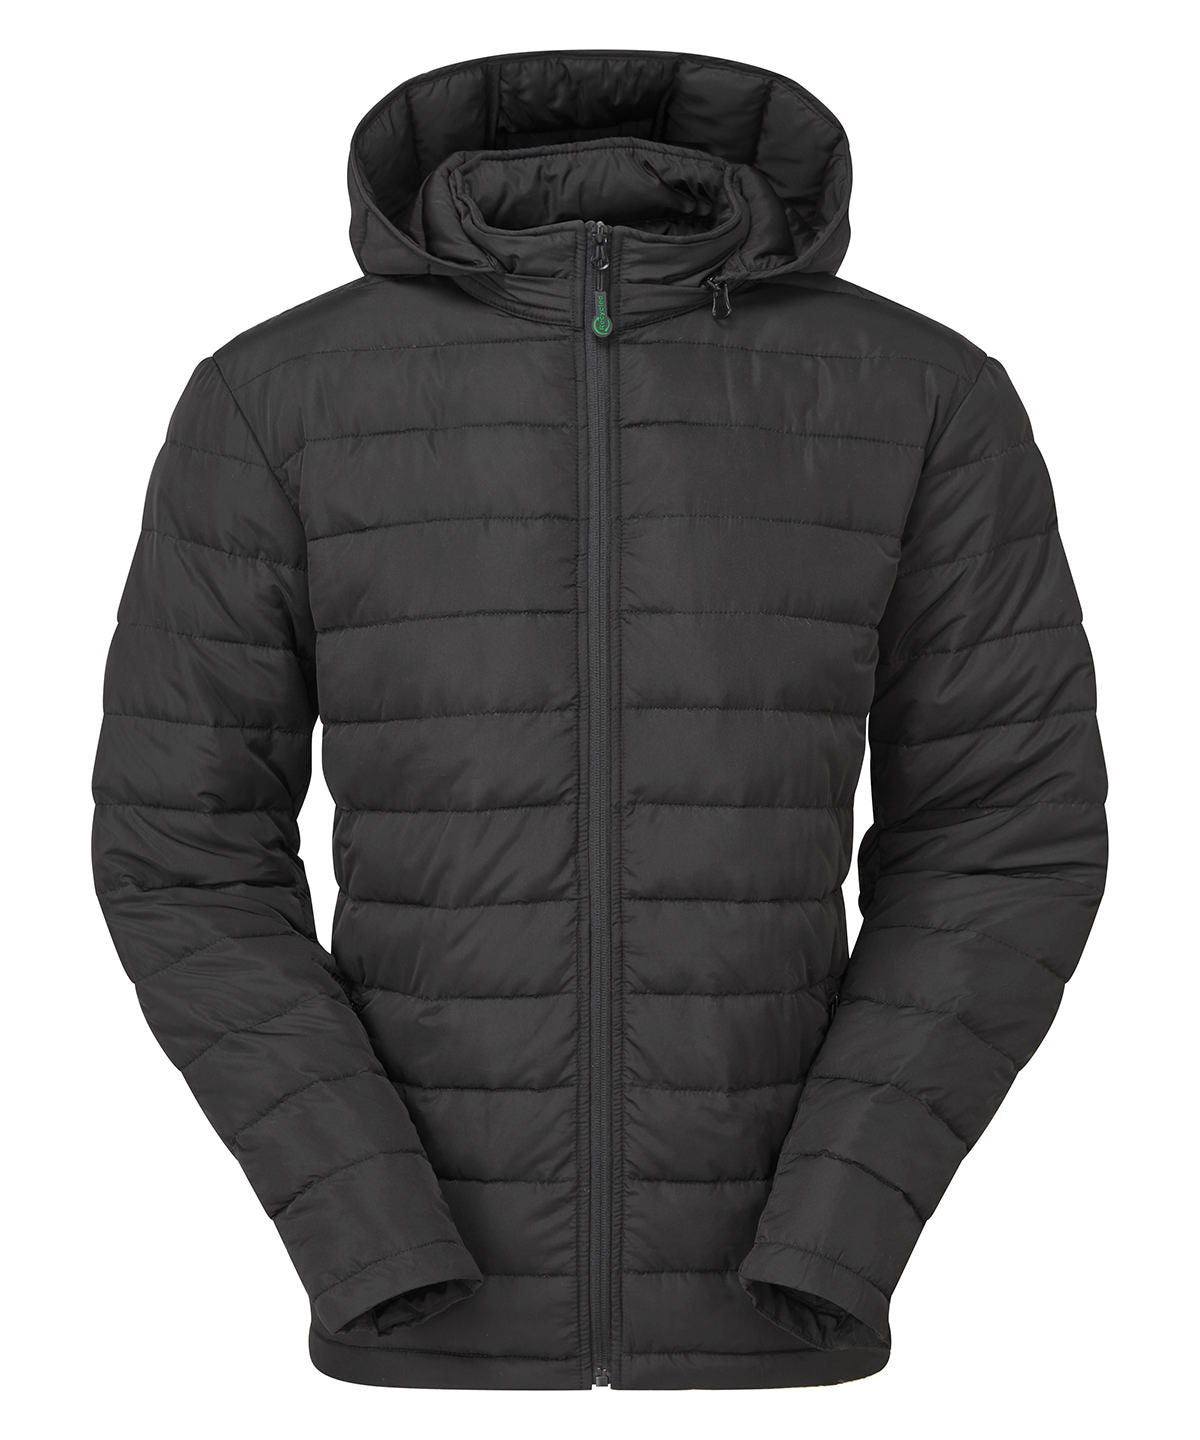 2786 Delmont recycled padded jacket